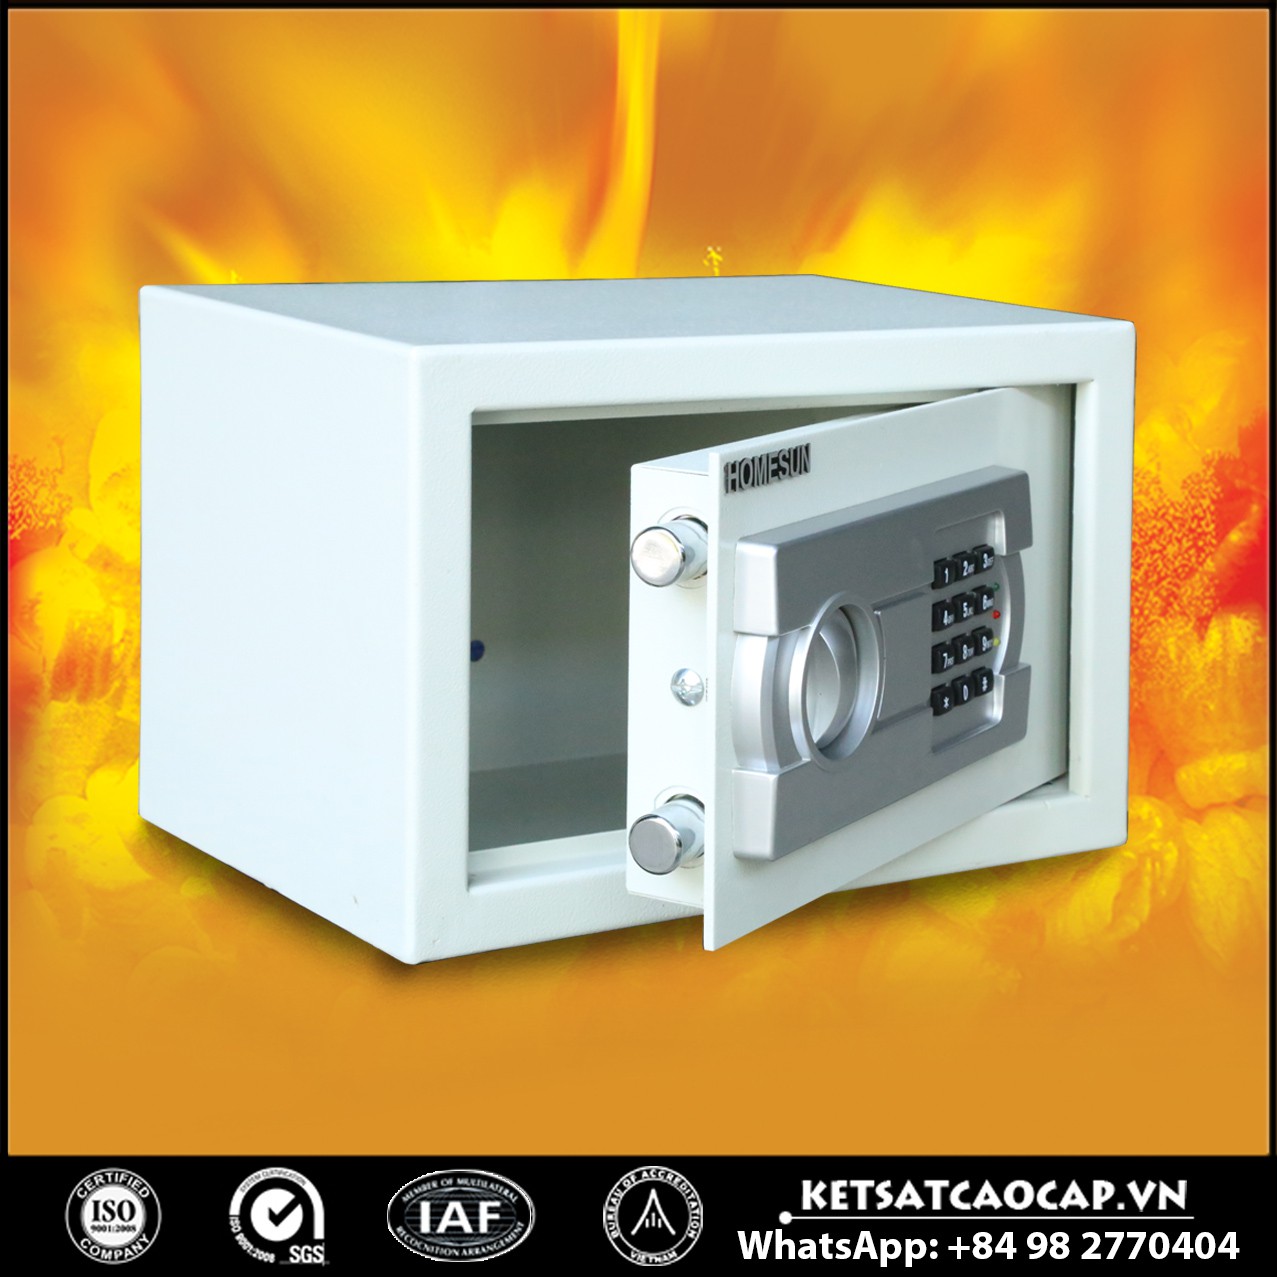 Safes in Hotel Suppliers and Exporters‎